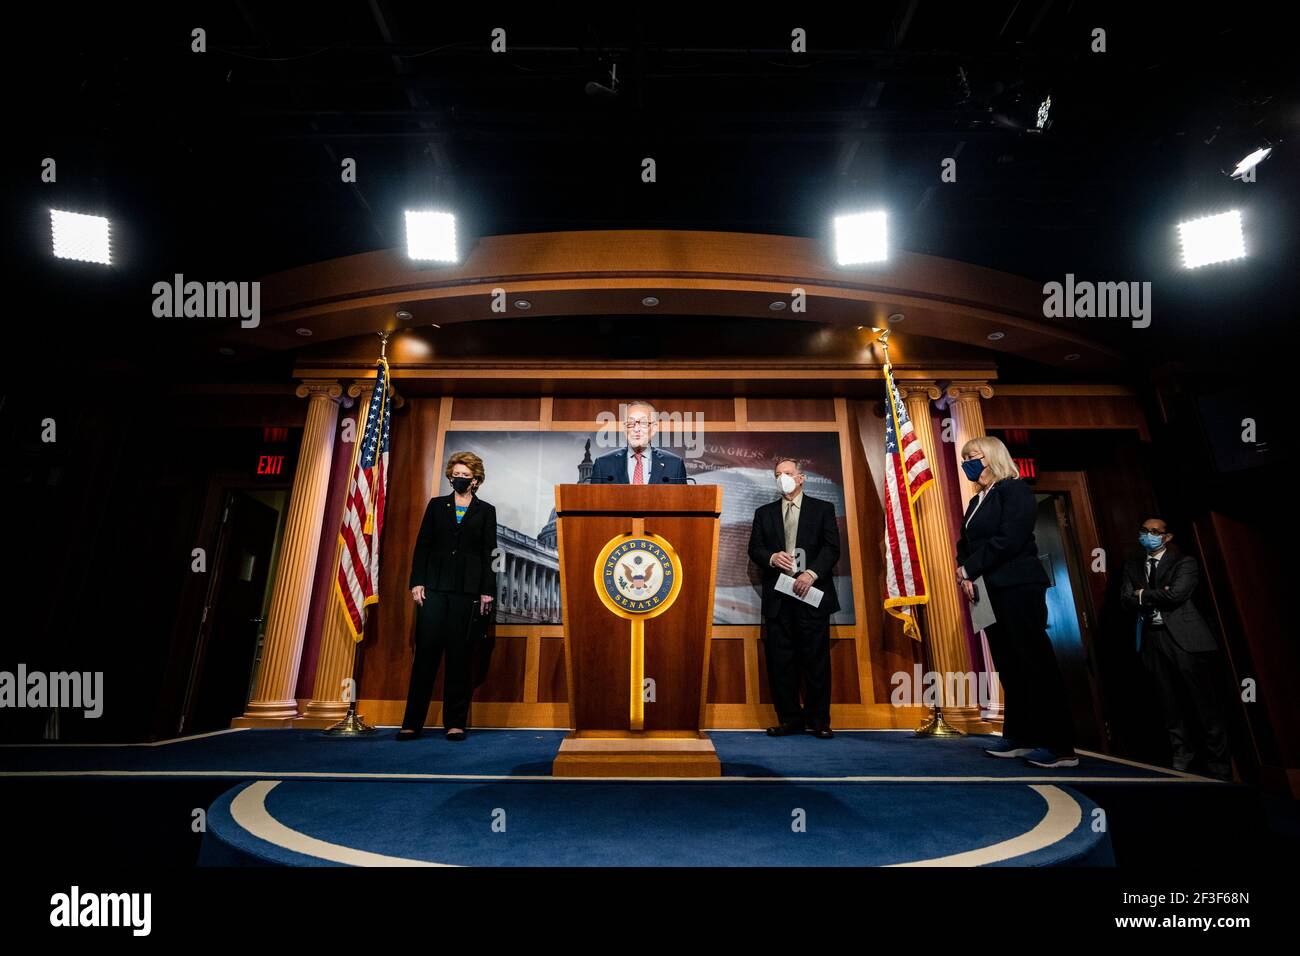 Senate Majority Leader Chuck Schumer, a Democrat from New York, speaks during a news conference with Democratic Senators (from left to right) Debbie Stabenow from Michigan, Richard Durbin from Illinois, and Patty Murray from Washington at the U.S. Capitol in Washington, D.C., U.S., on Tuesday, March 16, 2021. President Biden's next big economic package helped set off a heated debate among Republicans over whether to participate in the return of lawmakers' dedicated-spending projects, known as earmarks, a tussle that could be key to its success. Photographer: Samuel Corum/Pool/Sipa USA Stock Photo